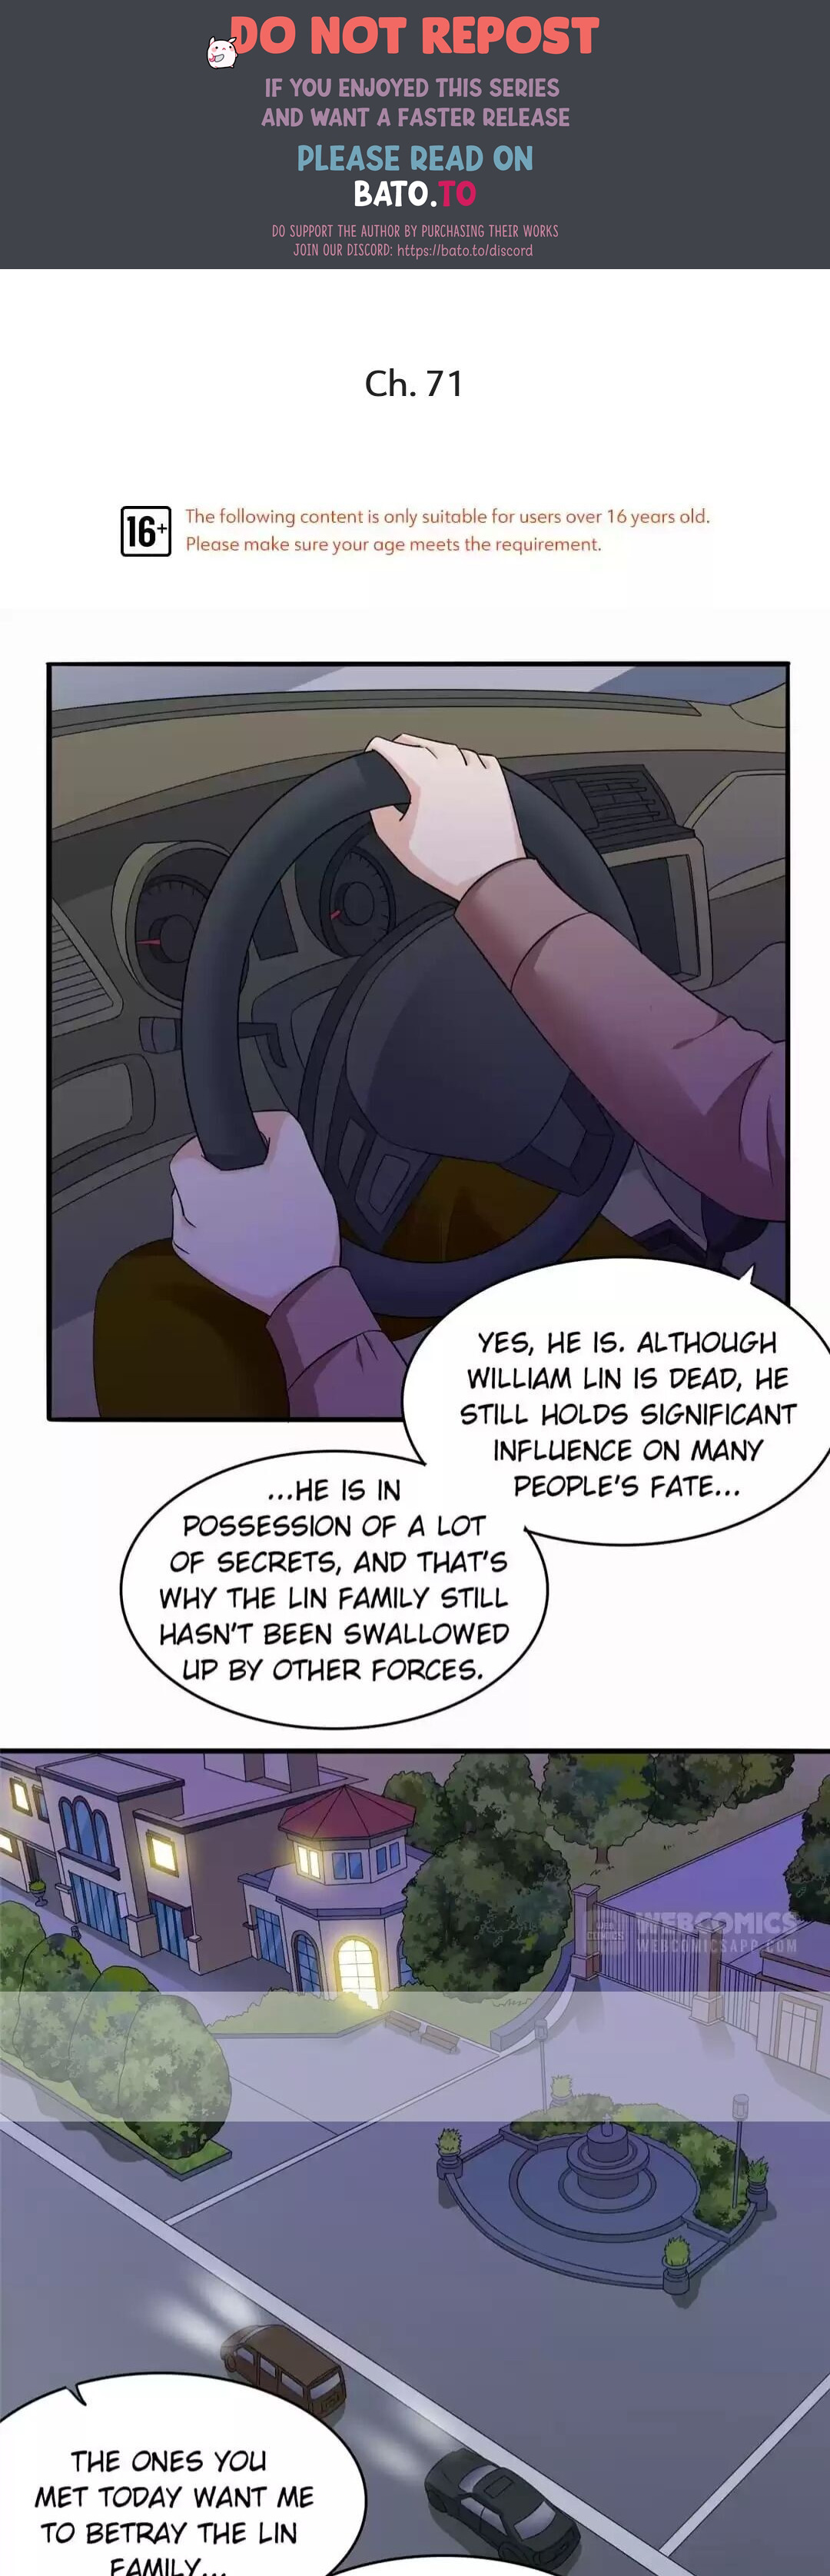 The Vengeance - Page 1